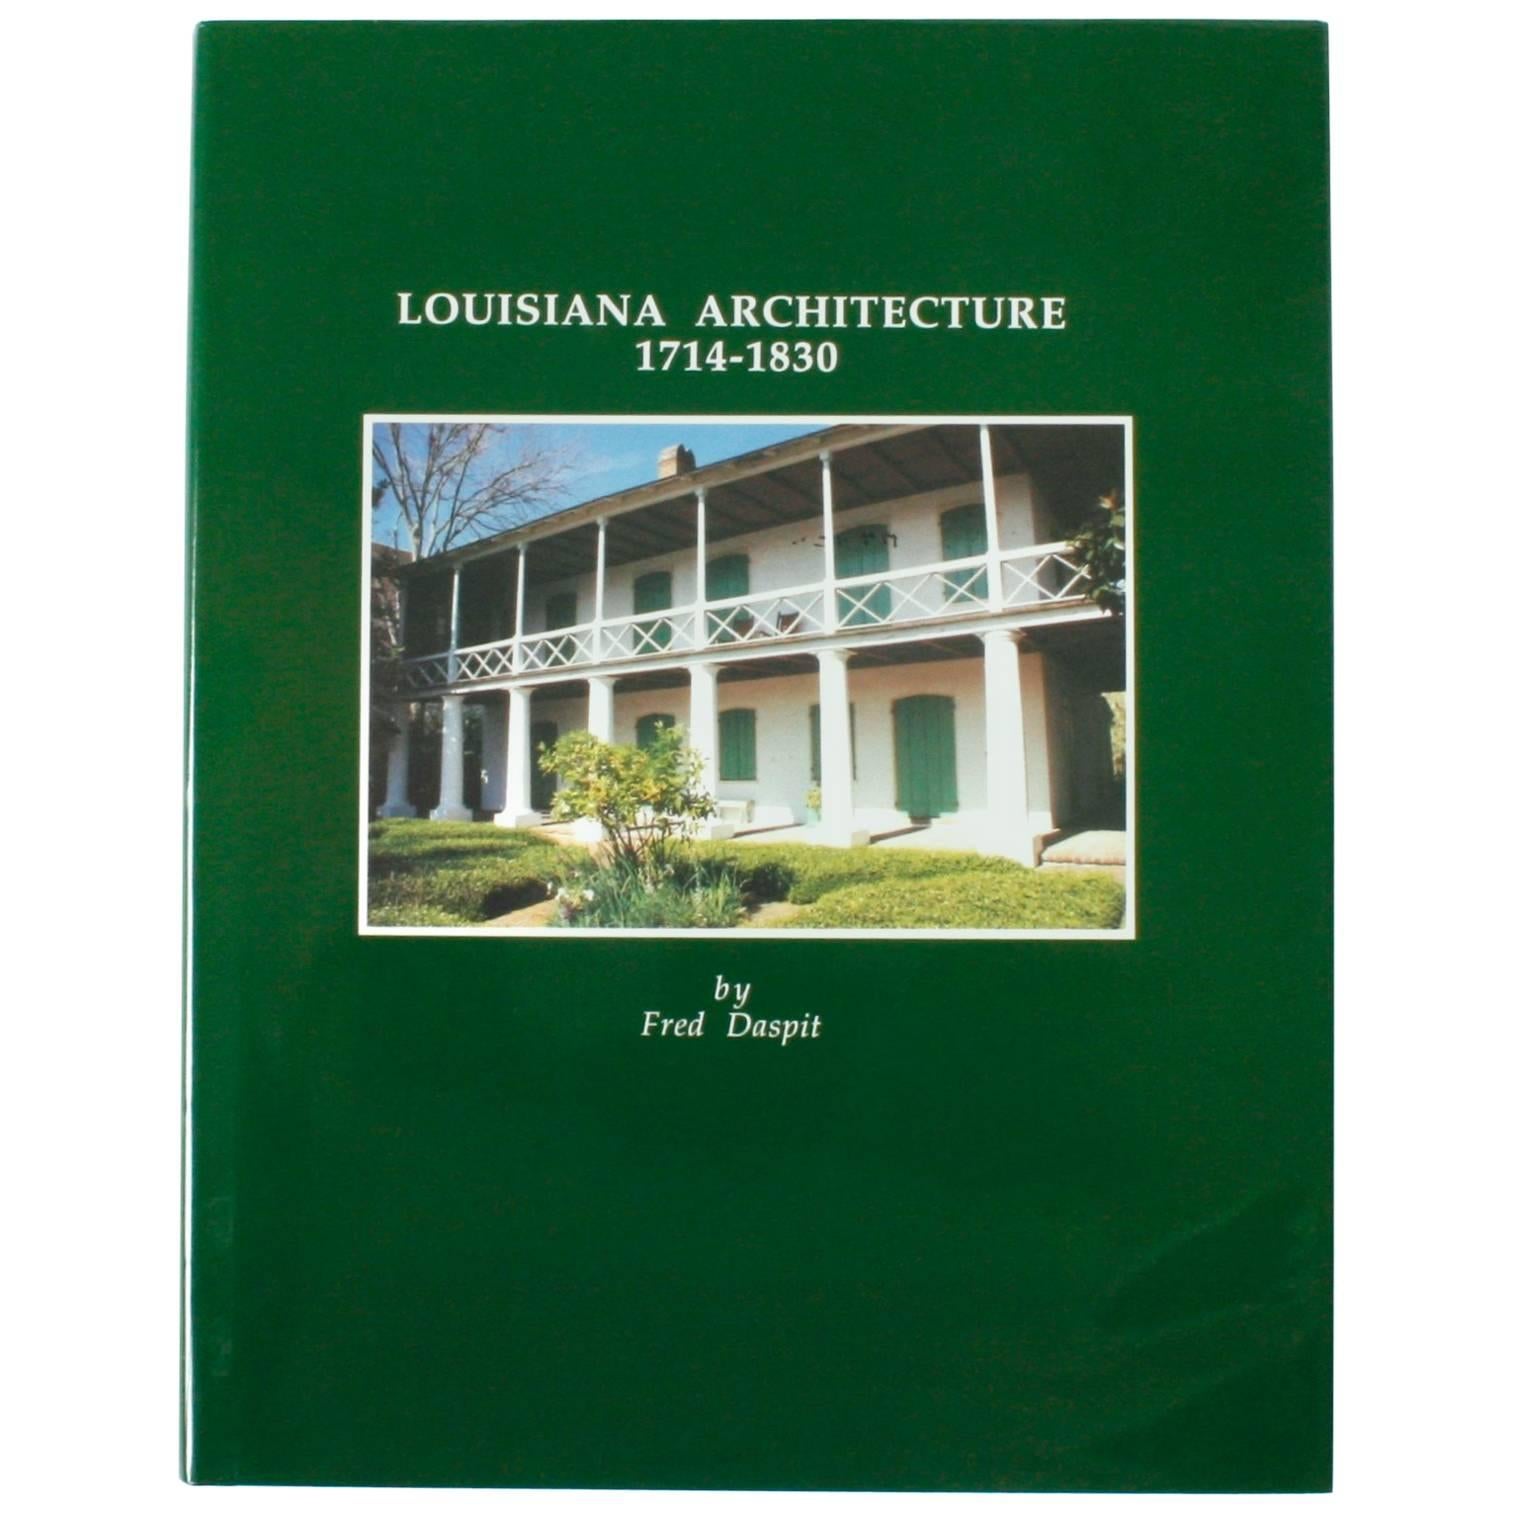 Louisiana Architecture 1714-1830 by Fred Daspit, First Edition For Sale